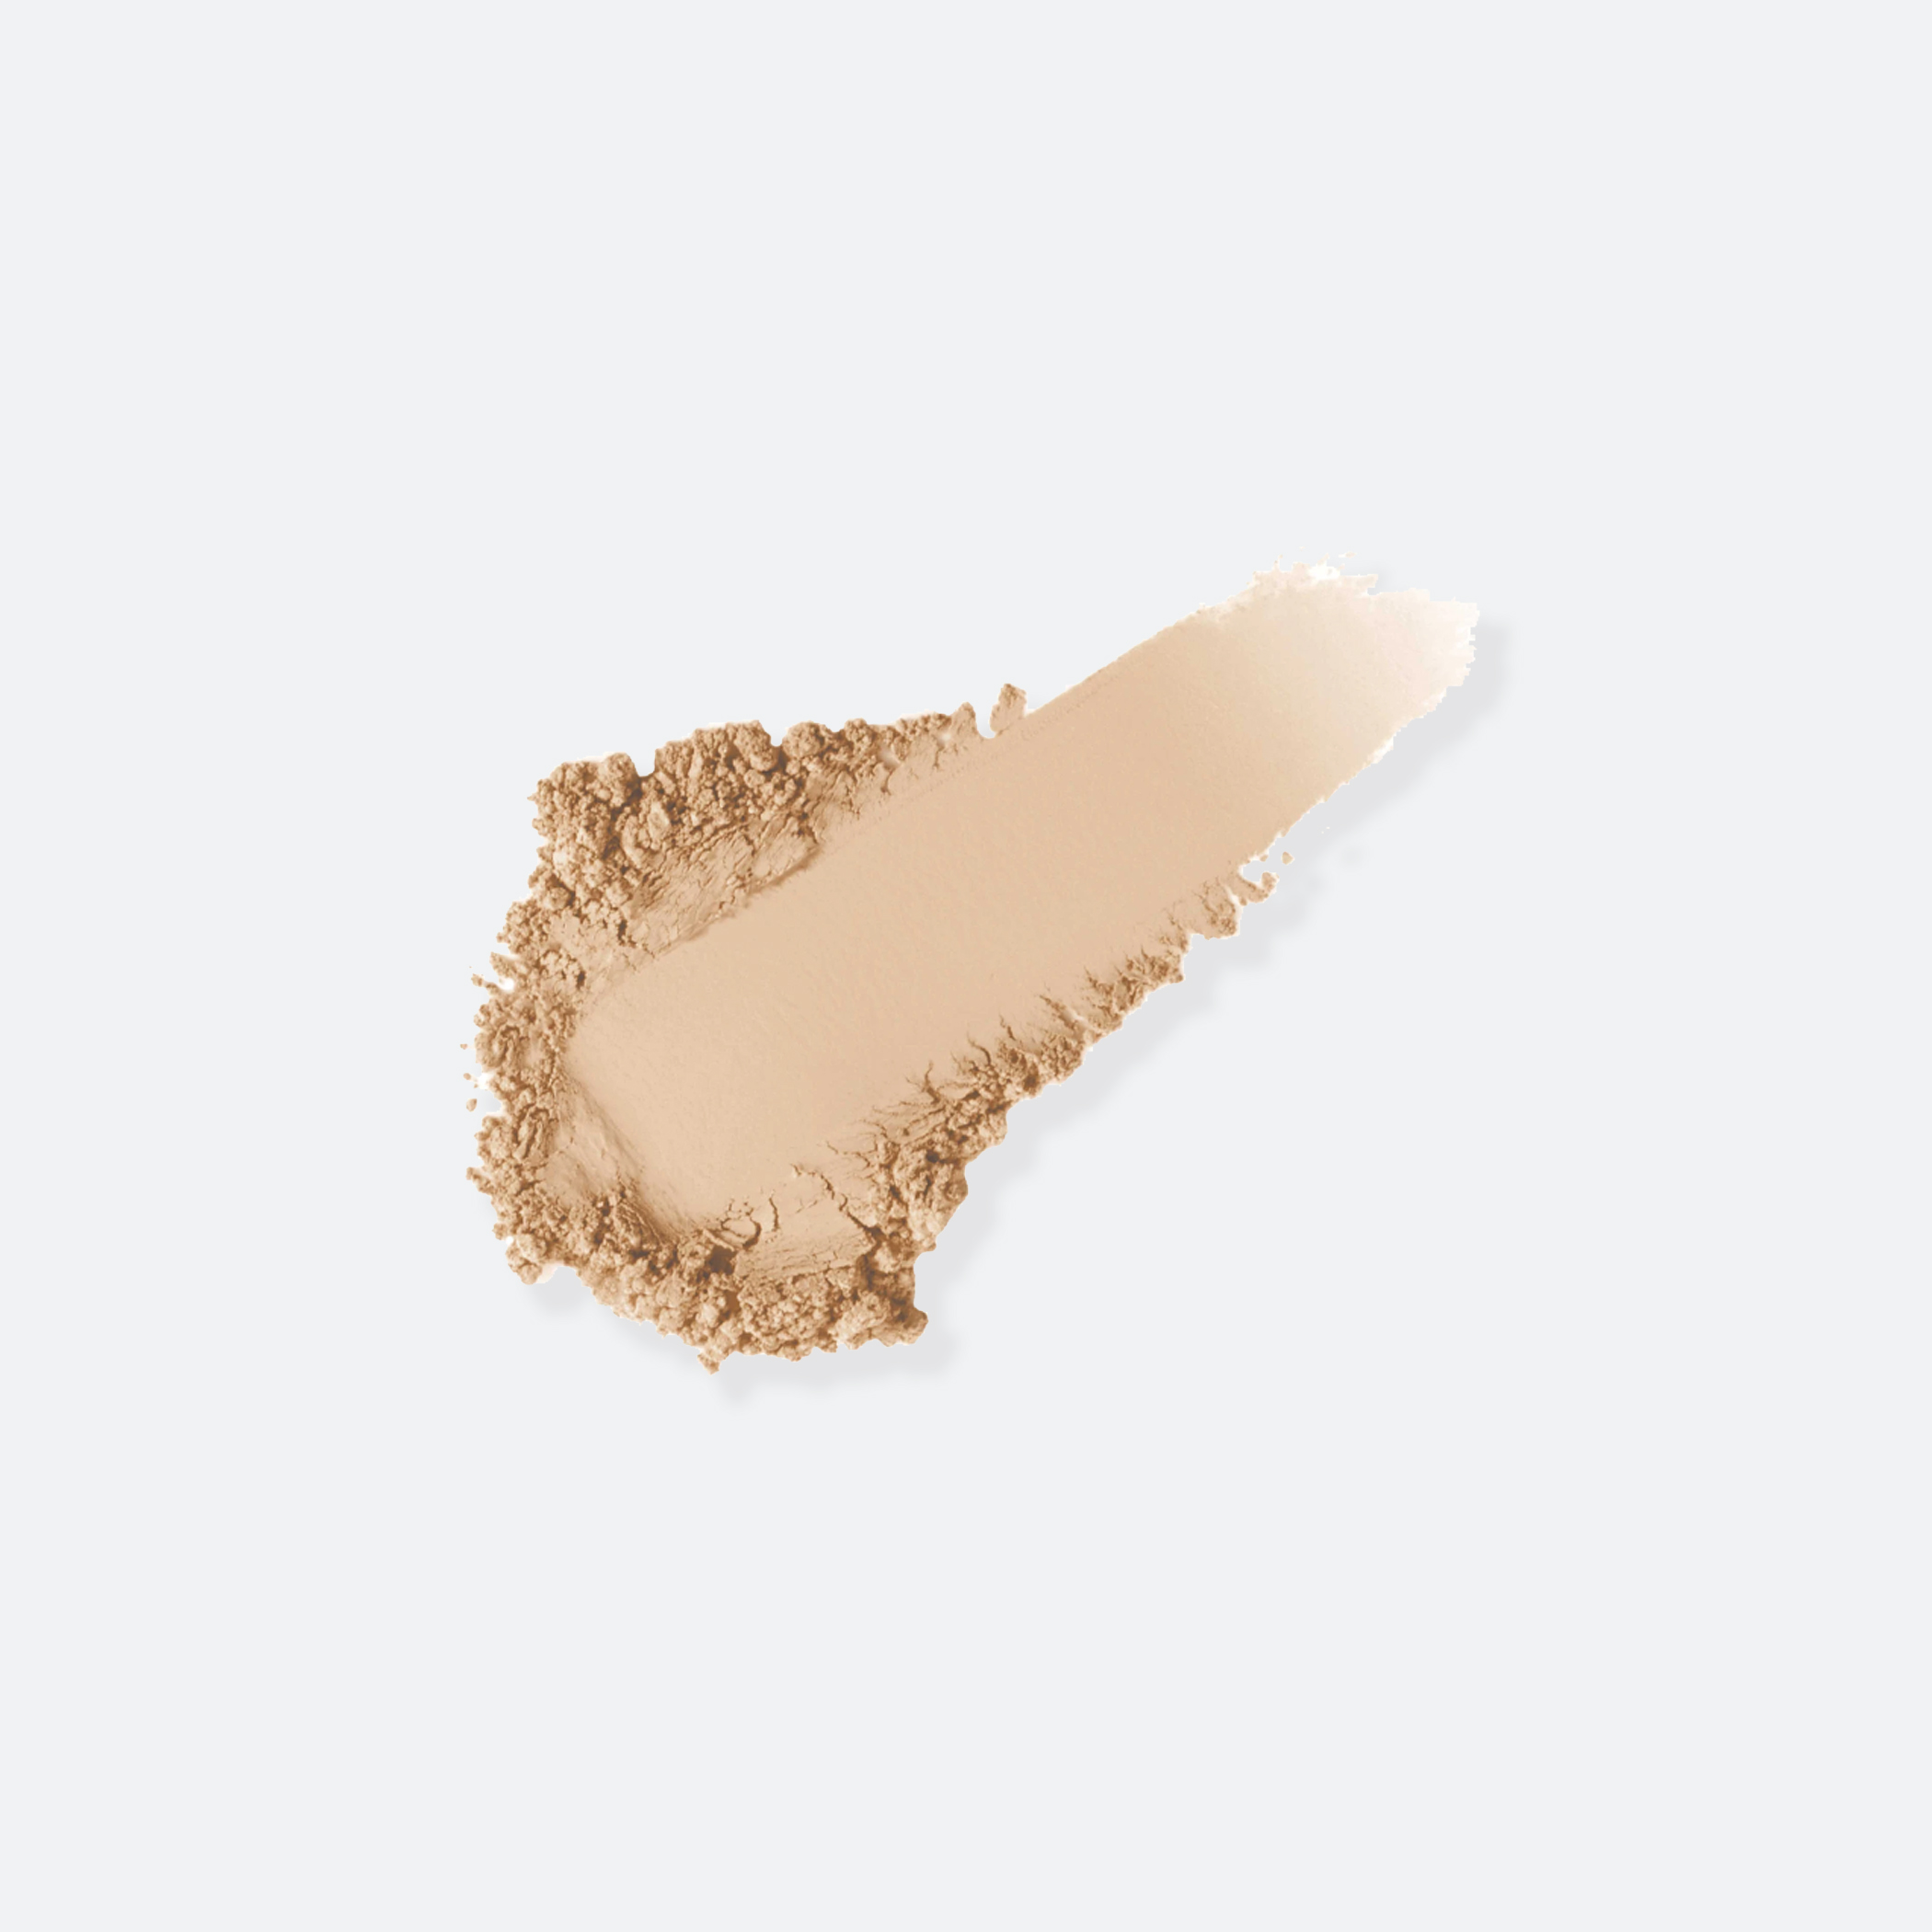 OhMart Jane iredale Powder-Me SPF Dry Sunscreen Refillable Brush (Nude) 2